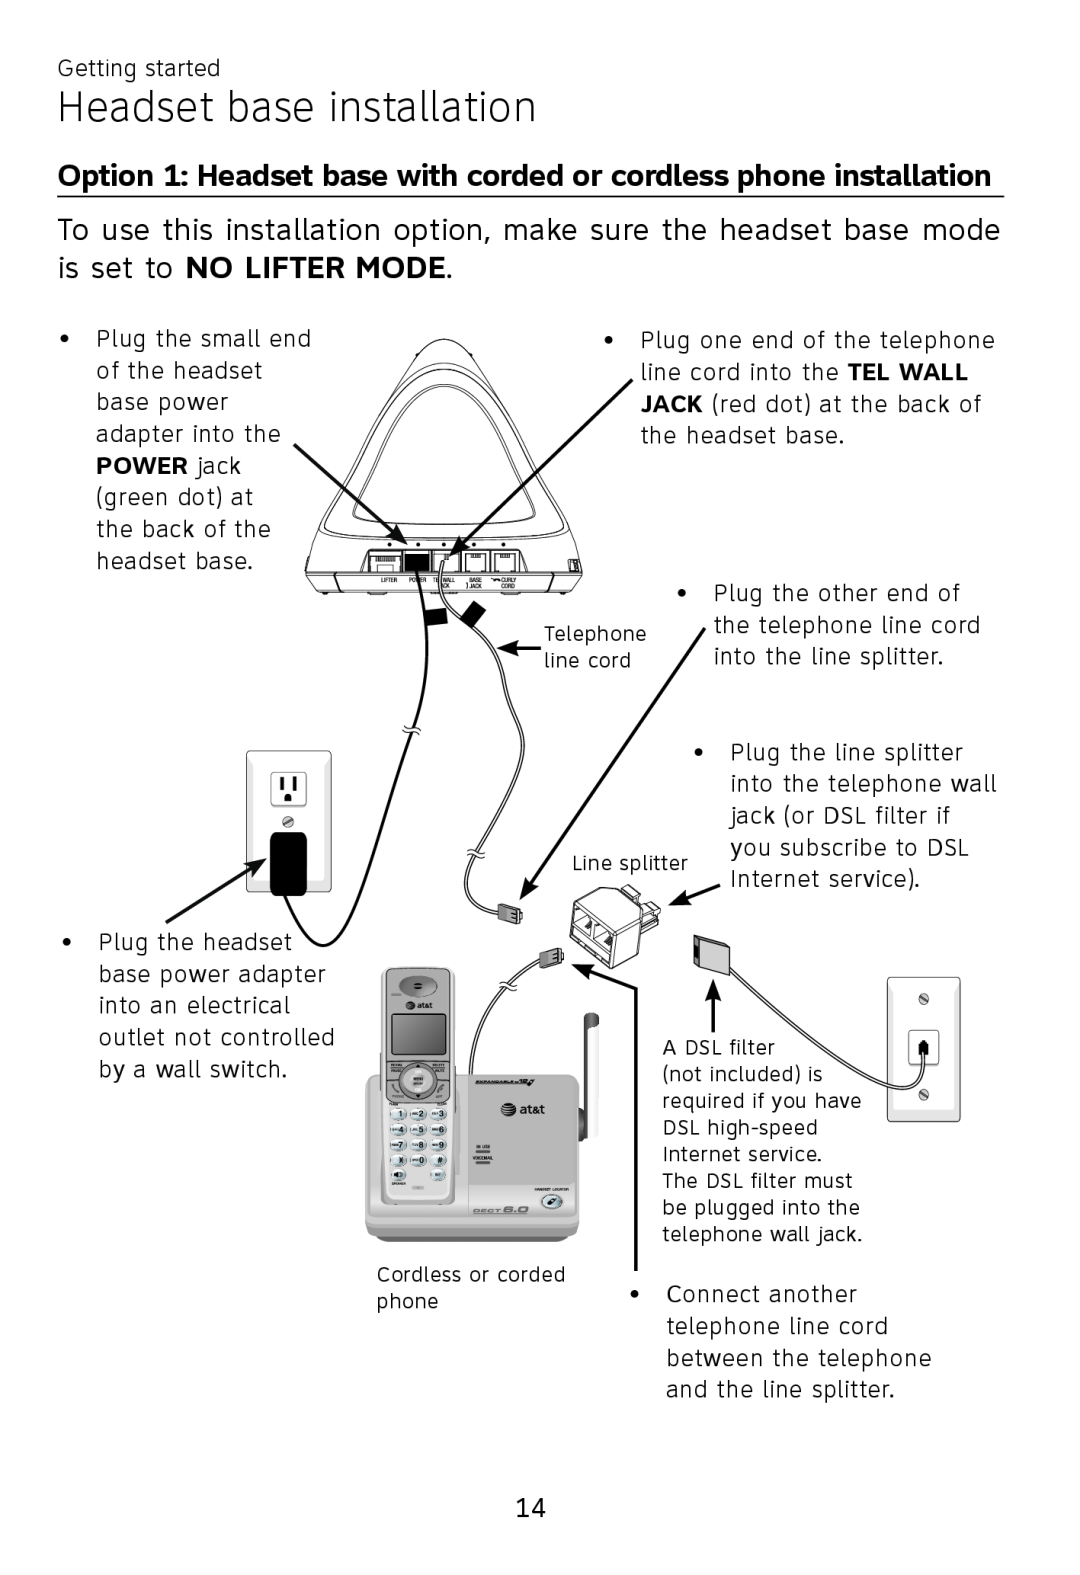 AT&T TL 7610 Option 1 Headset base with corded or cordless phone installation, Headset base installation, POWER jack 